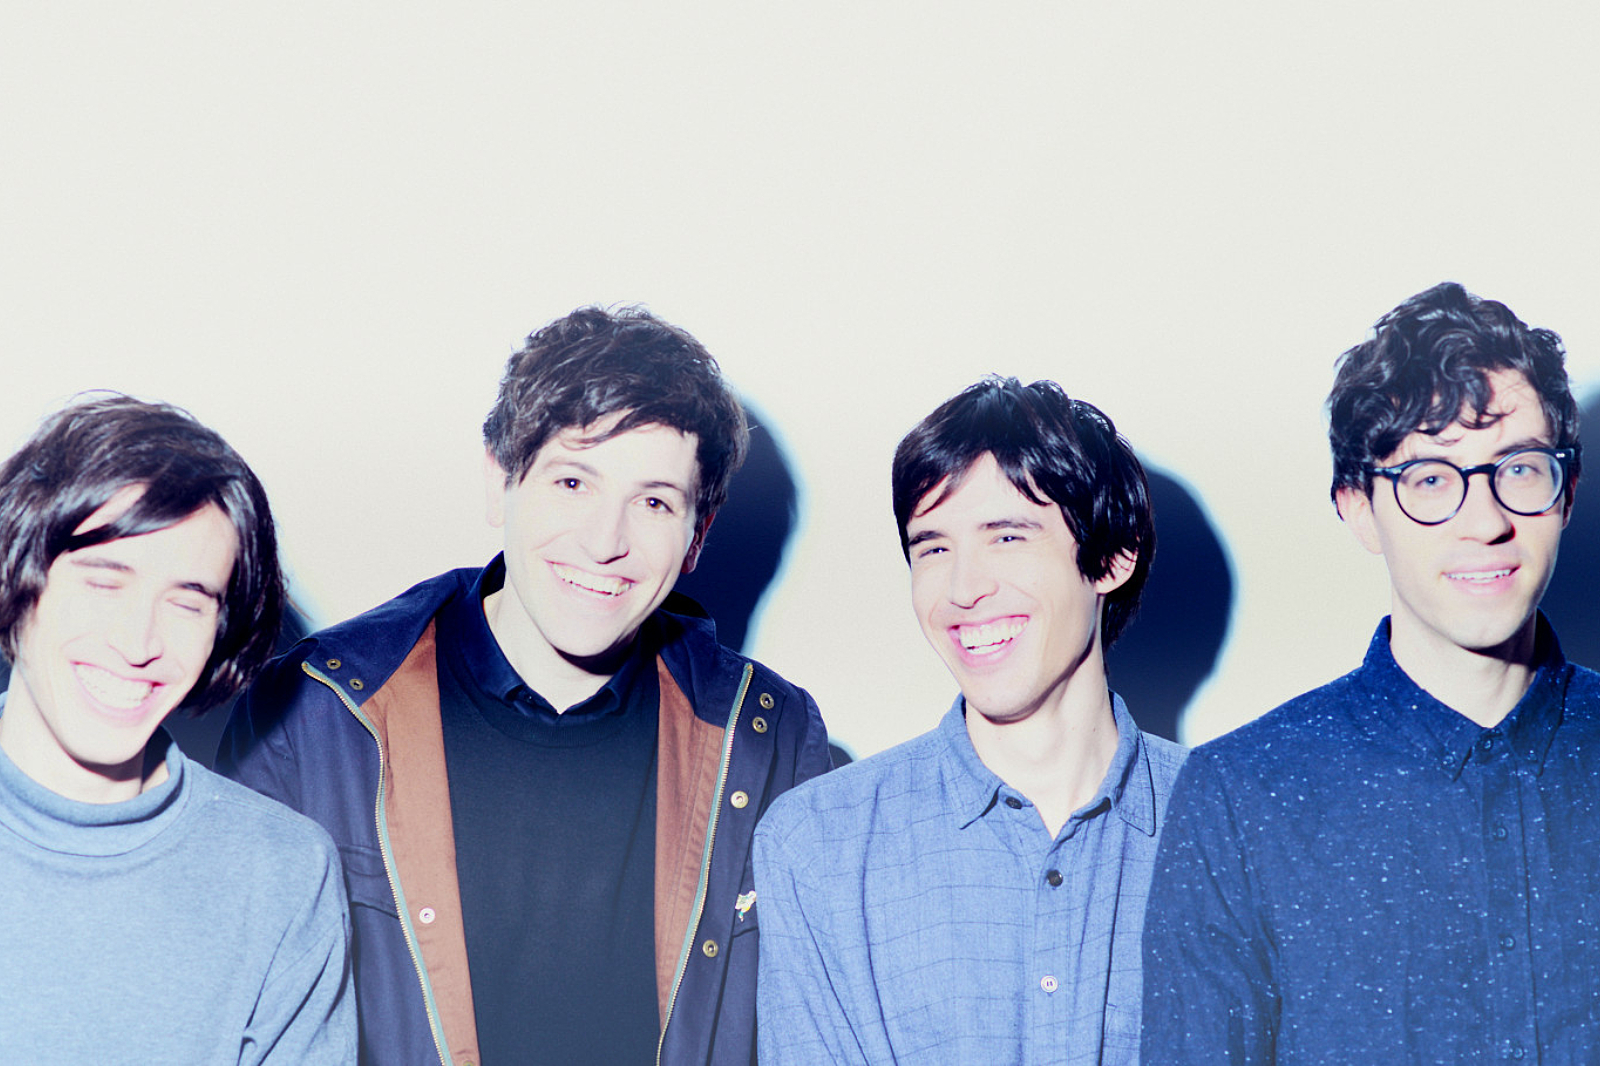 The Pains of Being Pure At Heart share two previously unreleased demos